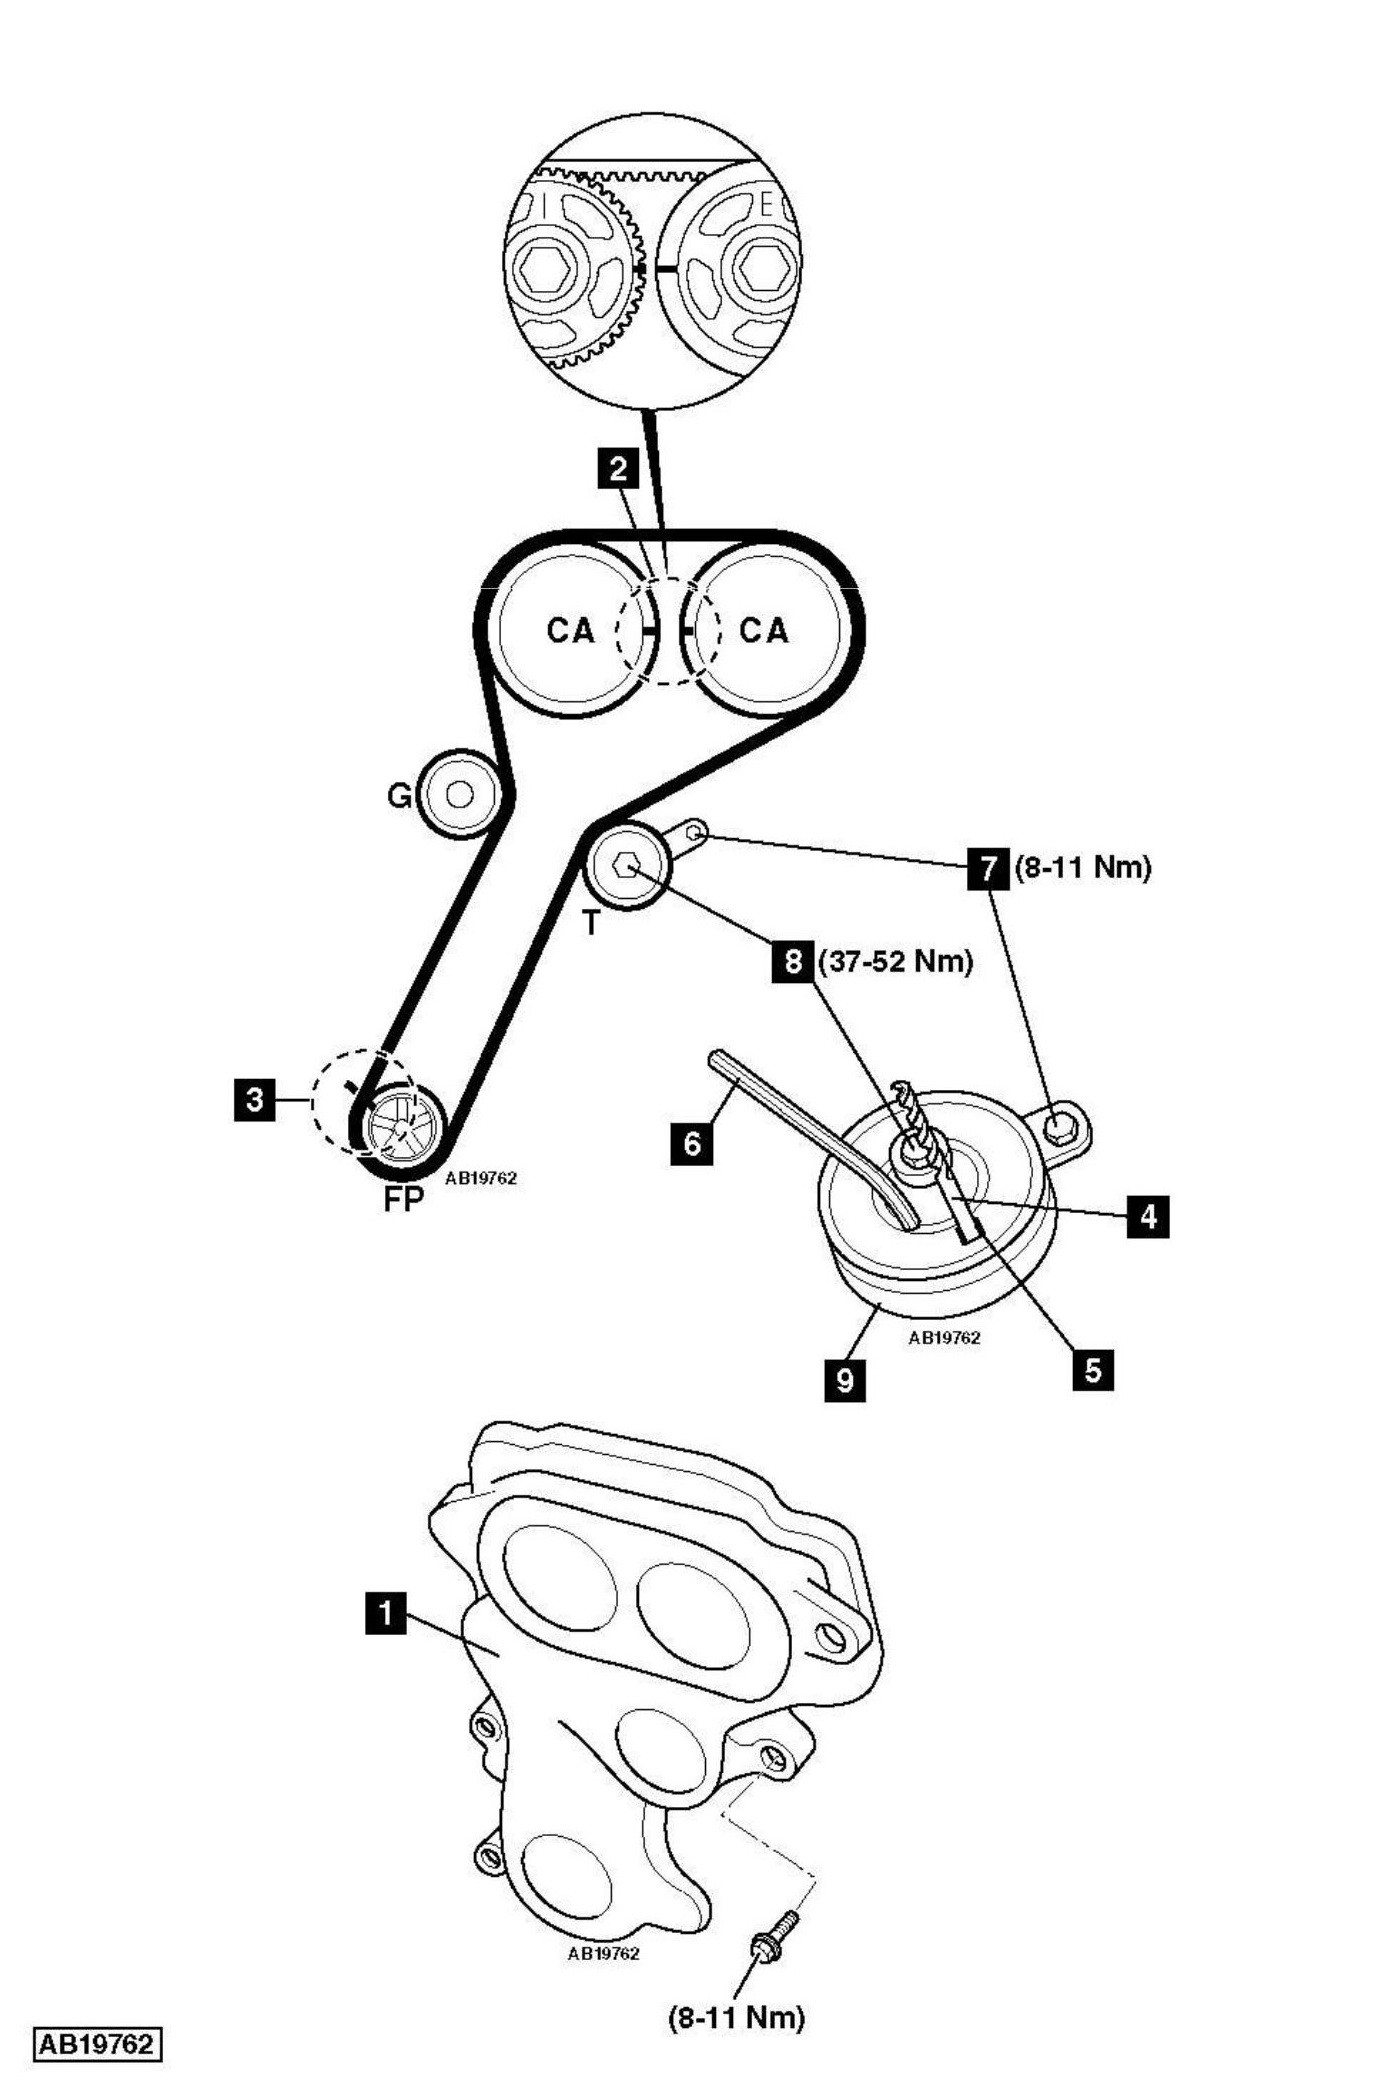 Engine Valve Timing Diagram to Replace Timing Belt On ford Ranger 3 0d Tdi 2008 Of Engine Valve Timing Diagram